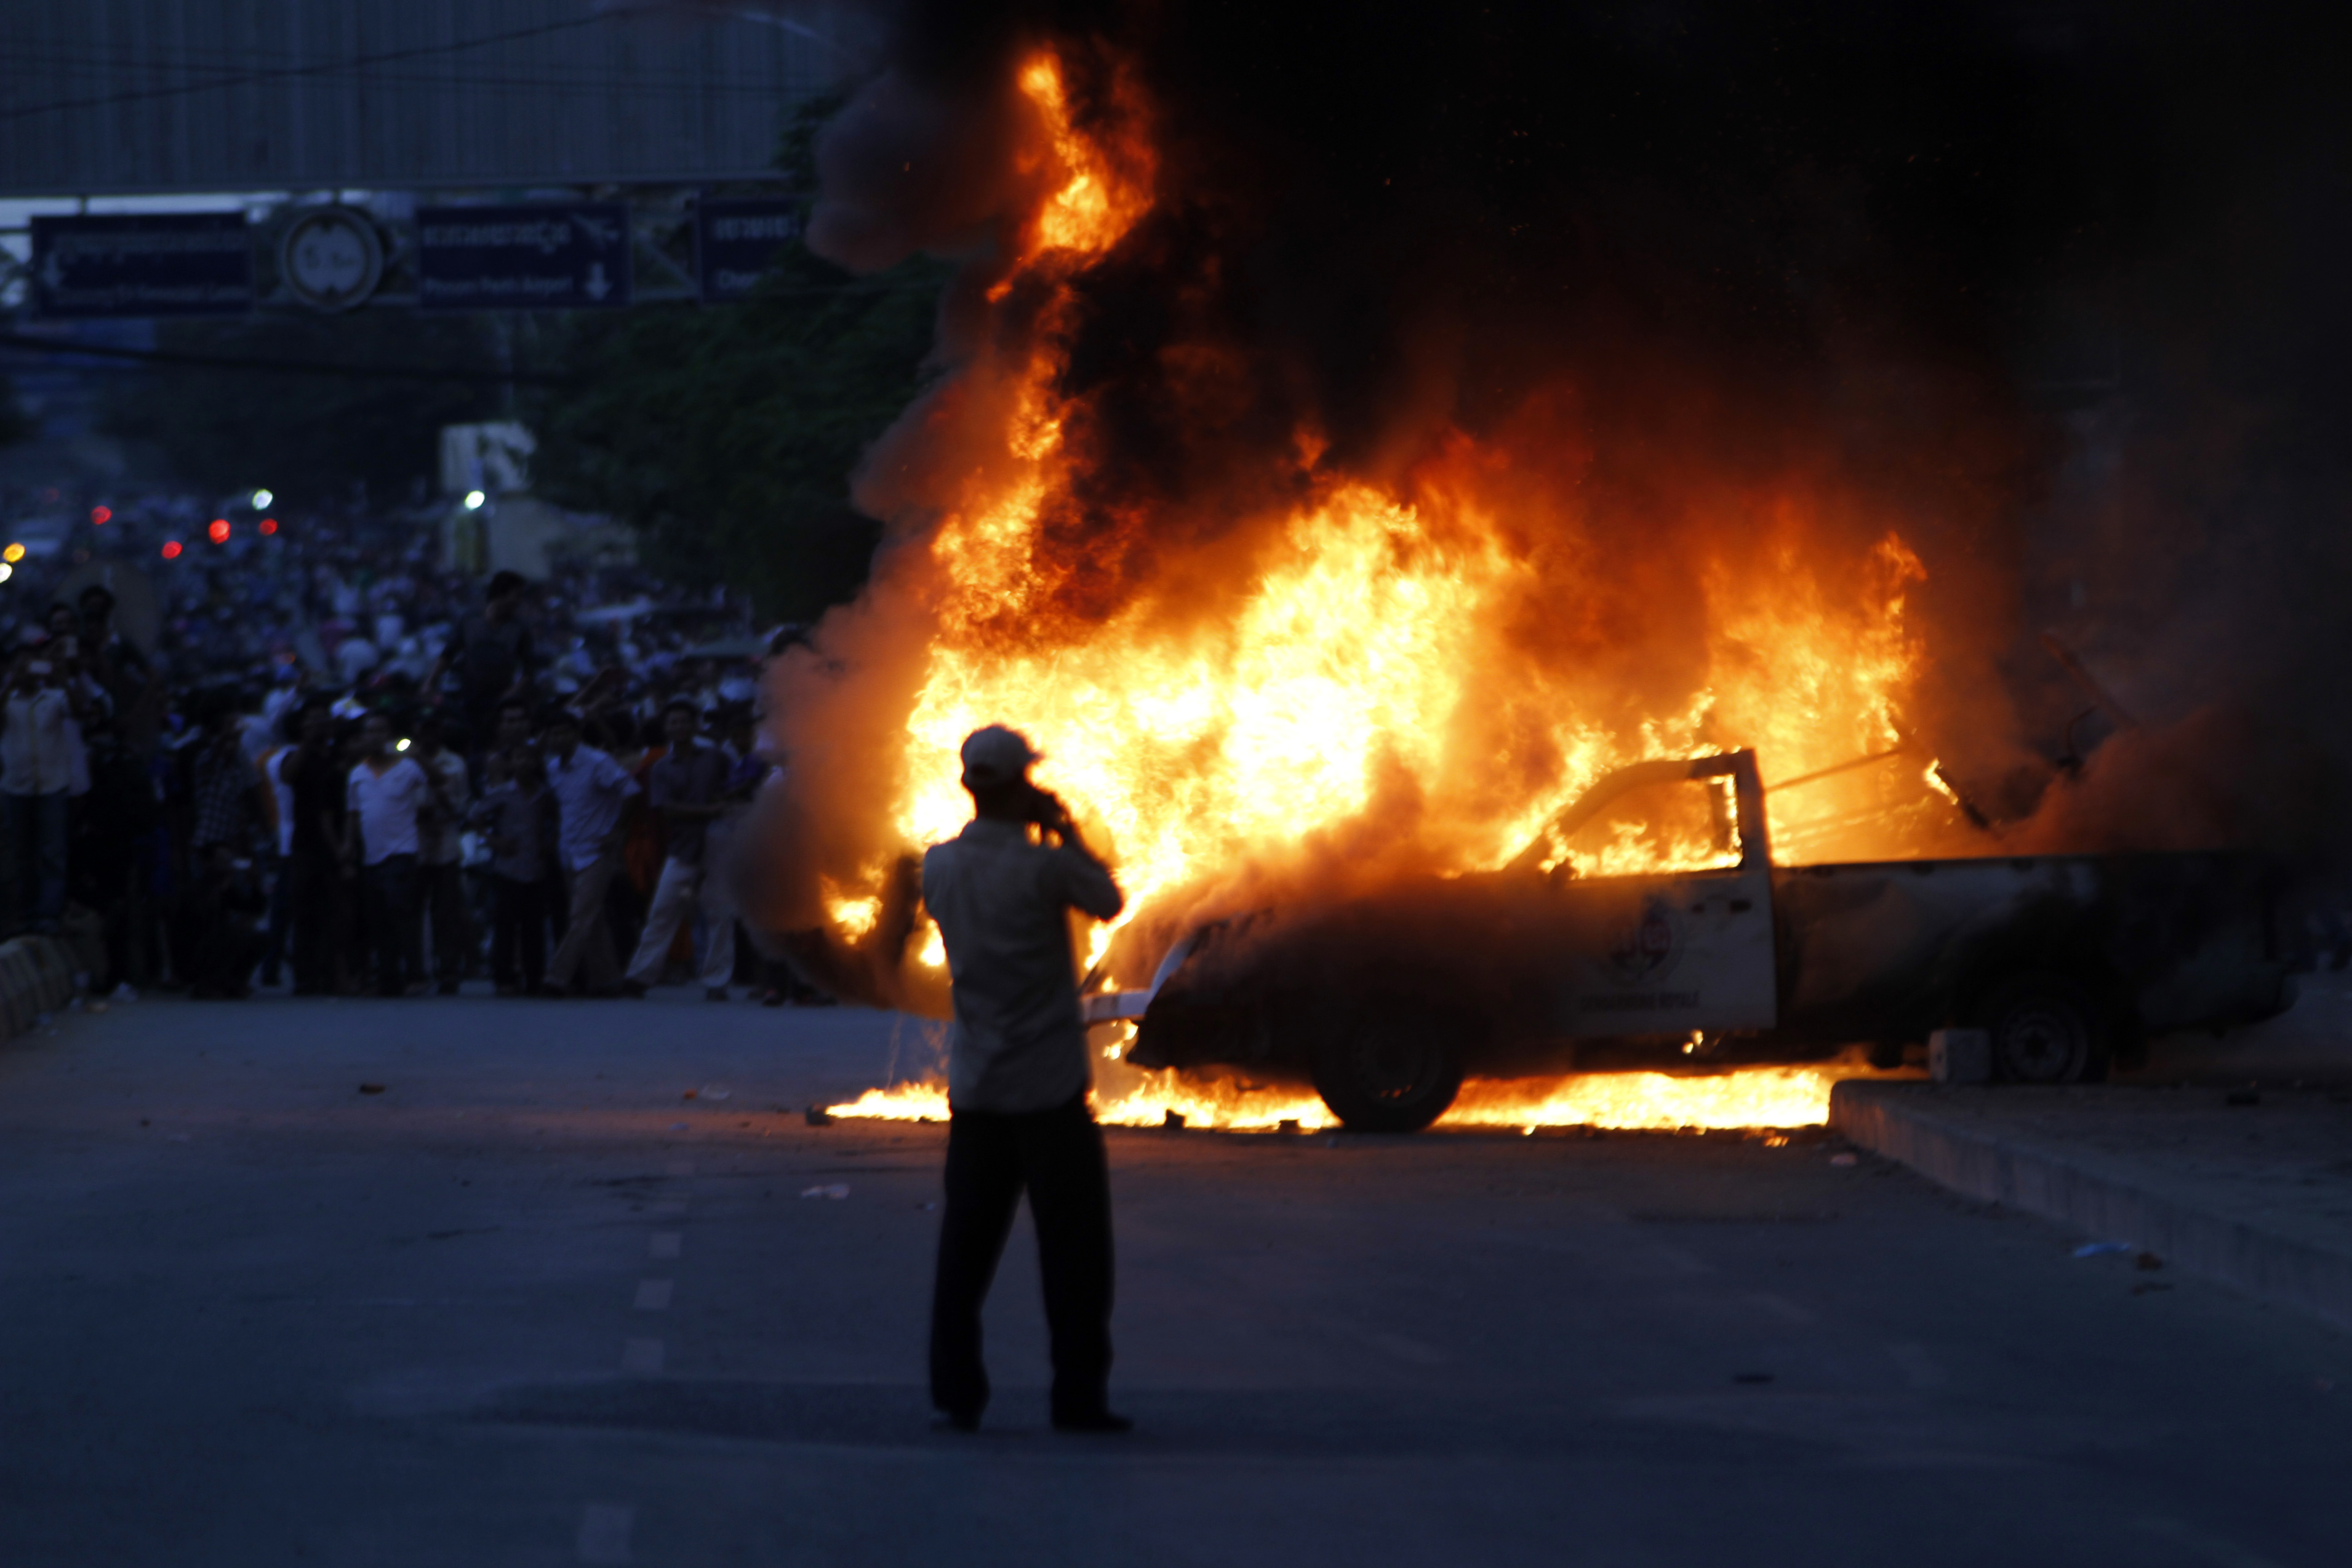 Protestors set fire on a police vehicle on Election Day in Phnom Penh. Photo: Xinhua